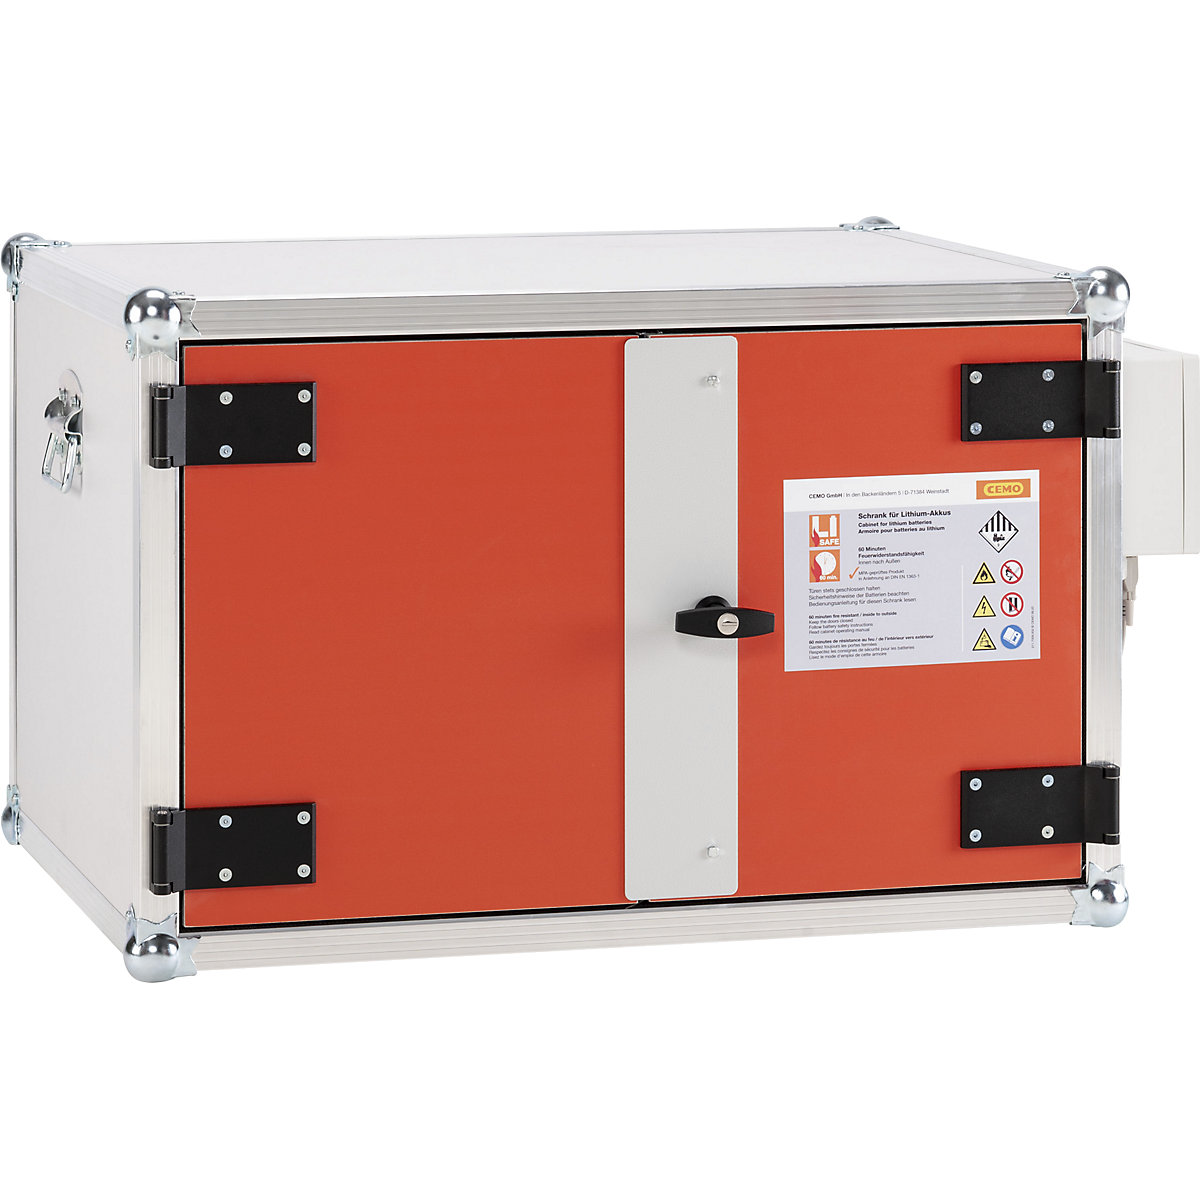 FR 60 safety battery charging cabinet - CEMO